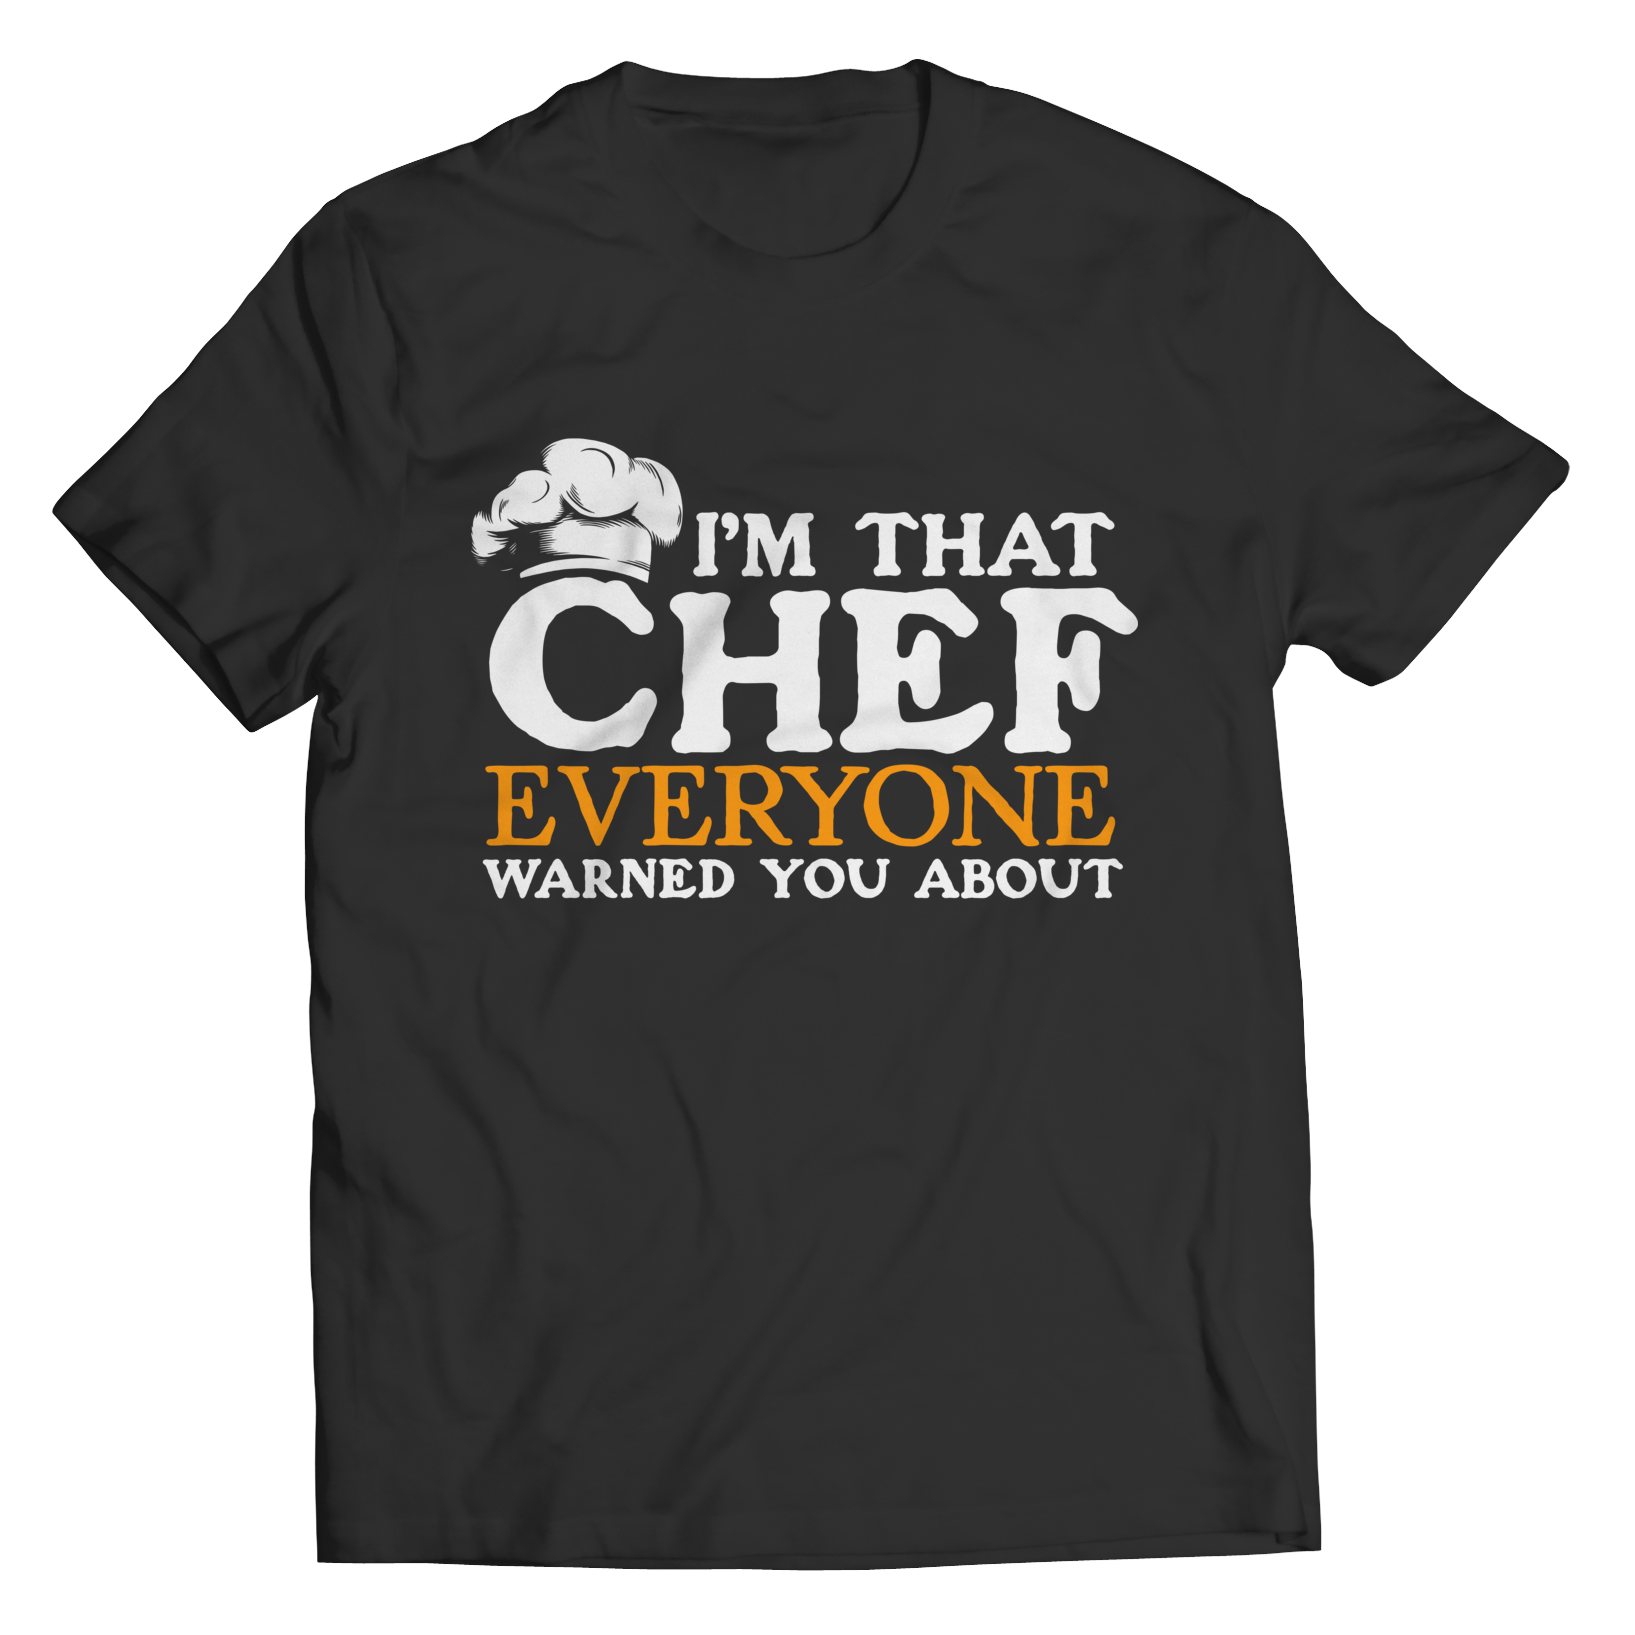 I'm That Chef Everyone Warned You About Unisex Tee Shirt